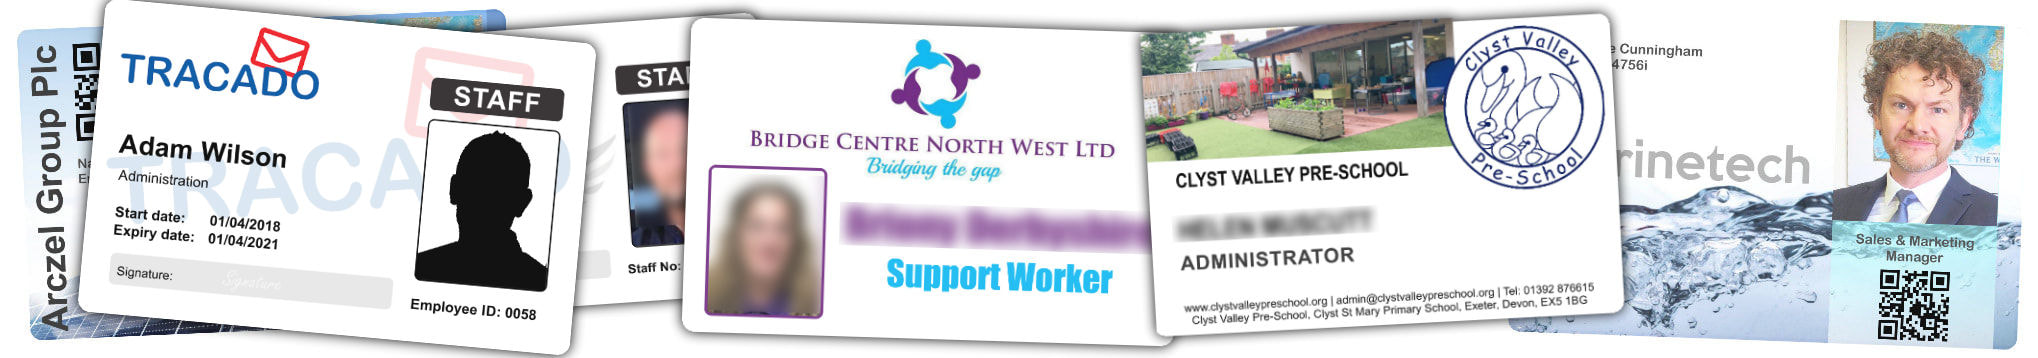 Sale examples of staff photo ID cards | samples of employee Identity card printing | Workers ID cards printed in 